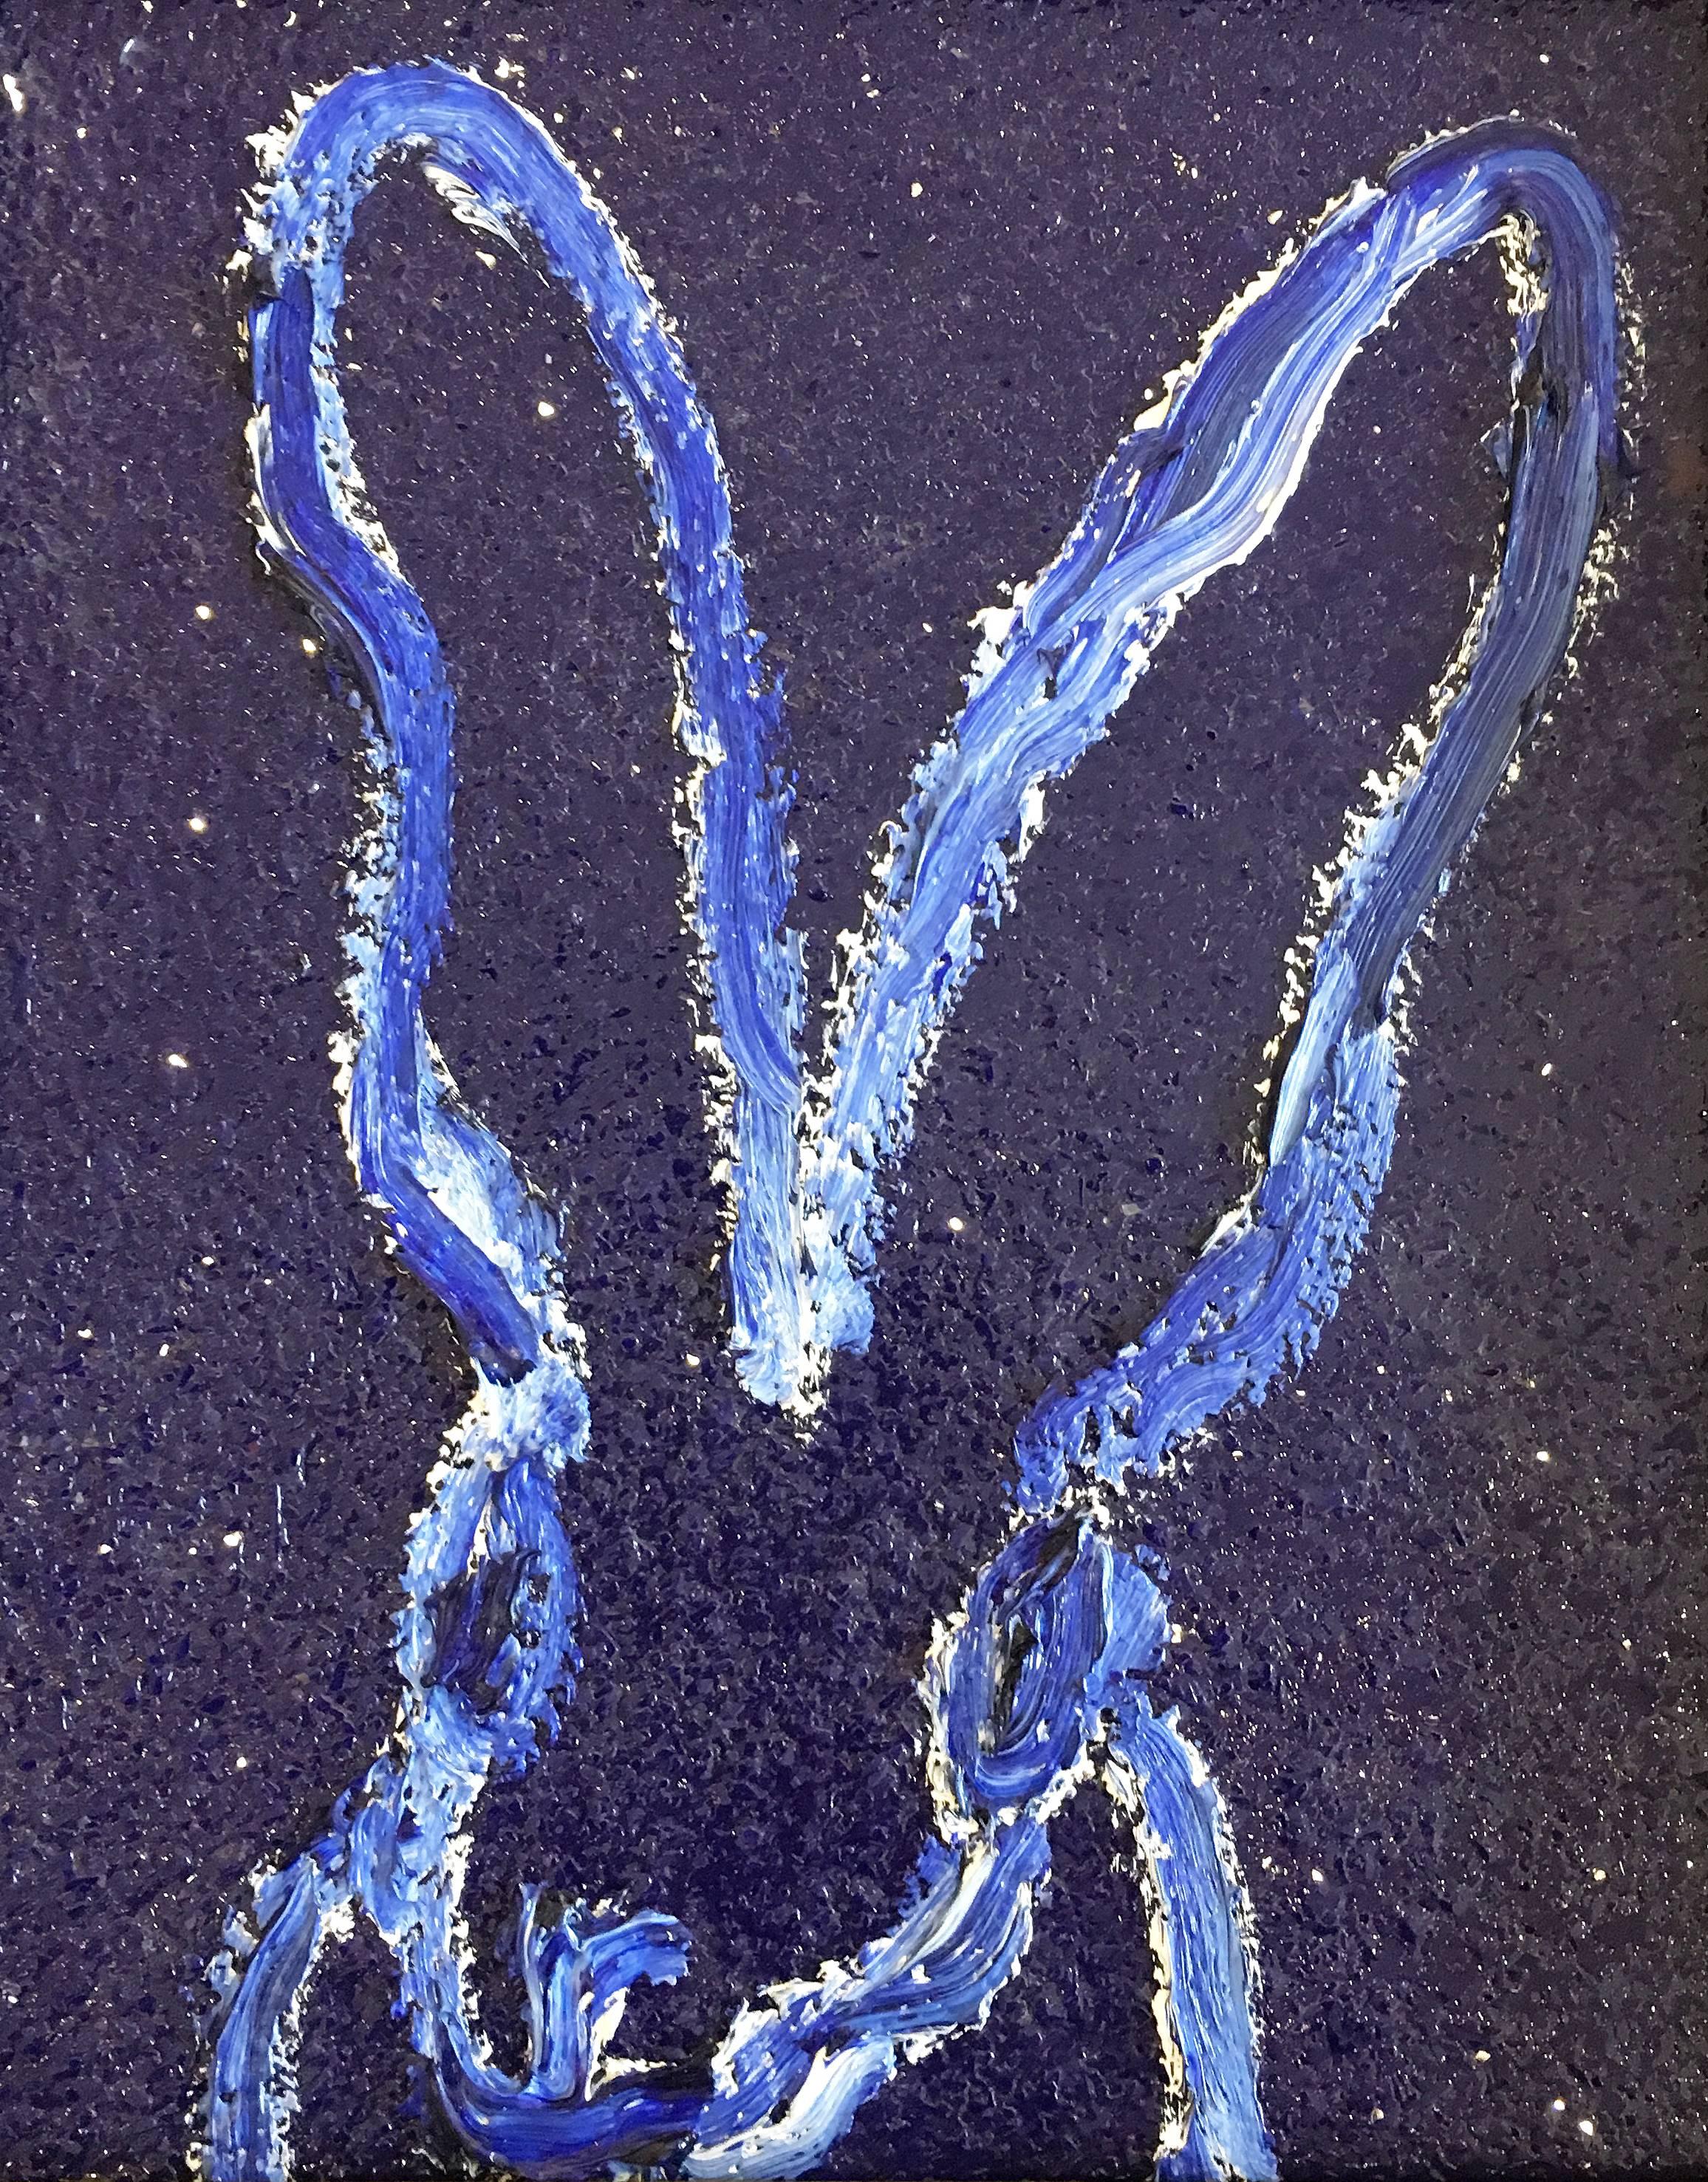 'Untitled' 2017 by renowned New York City artist, Hunt Slonem. Oil, acrylic, and diamond dust on wood, 11 x 9 in. This painting features a charming portrait of a bunny outlined in white and blue. The background is painted in a deep blue color with